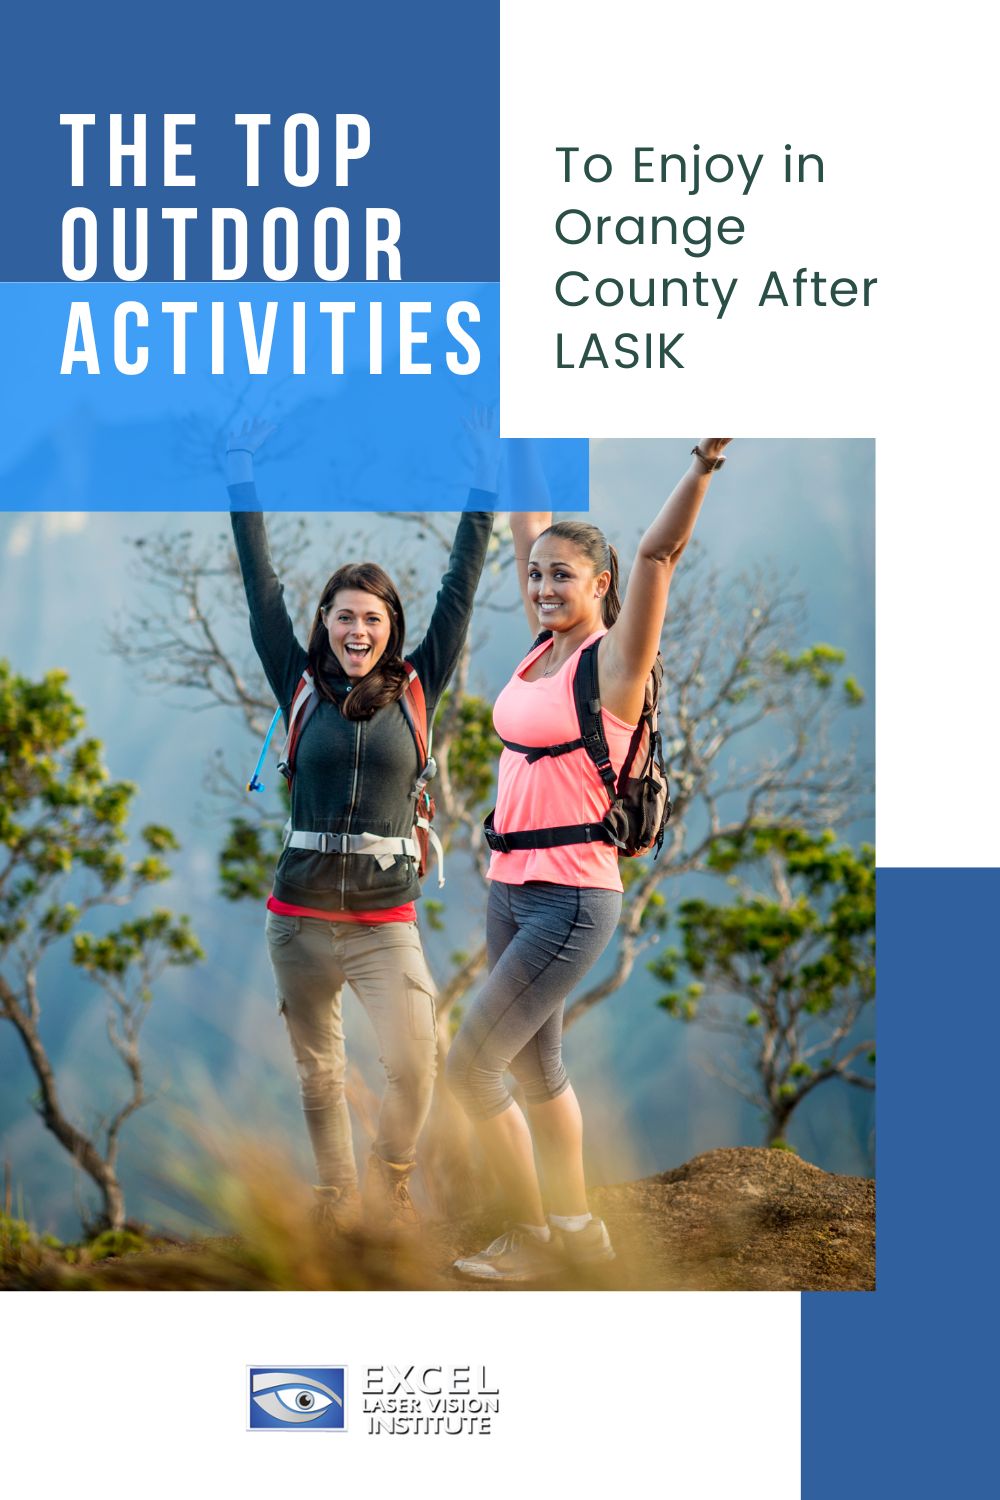 women-hiking-blog-title-The-Top-Outdoor-Activities-to-Enjoy-in-Orange-County-After-LASIK-Pinterest-Pin